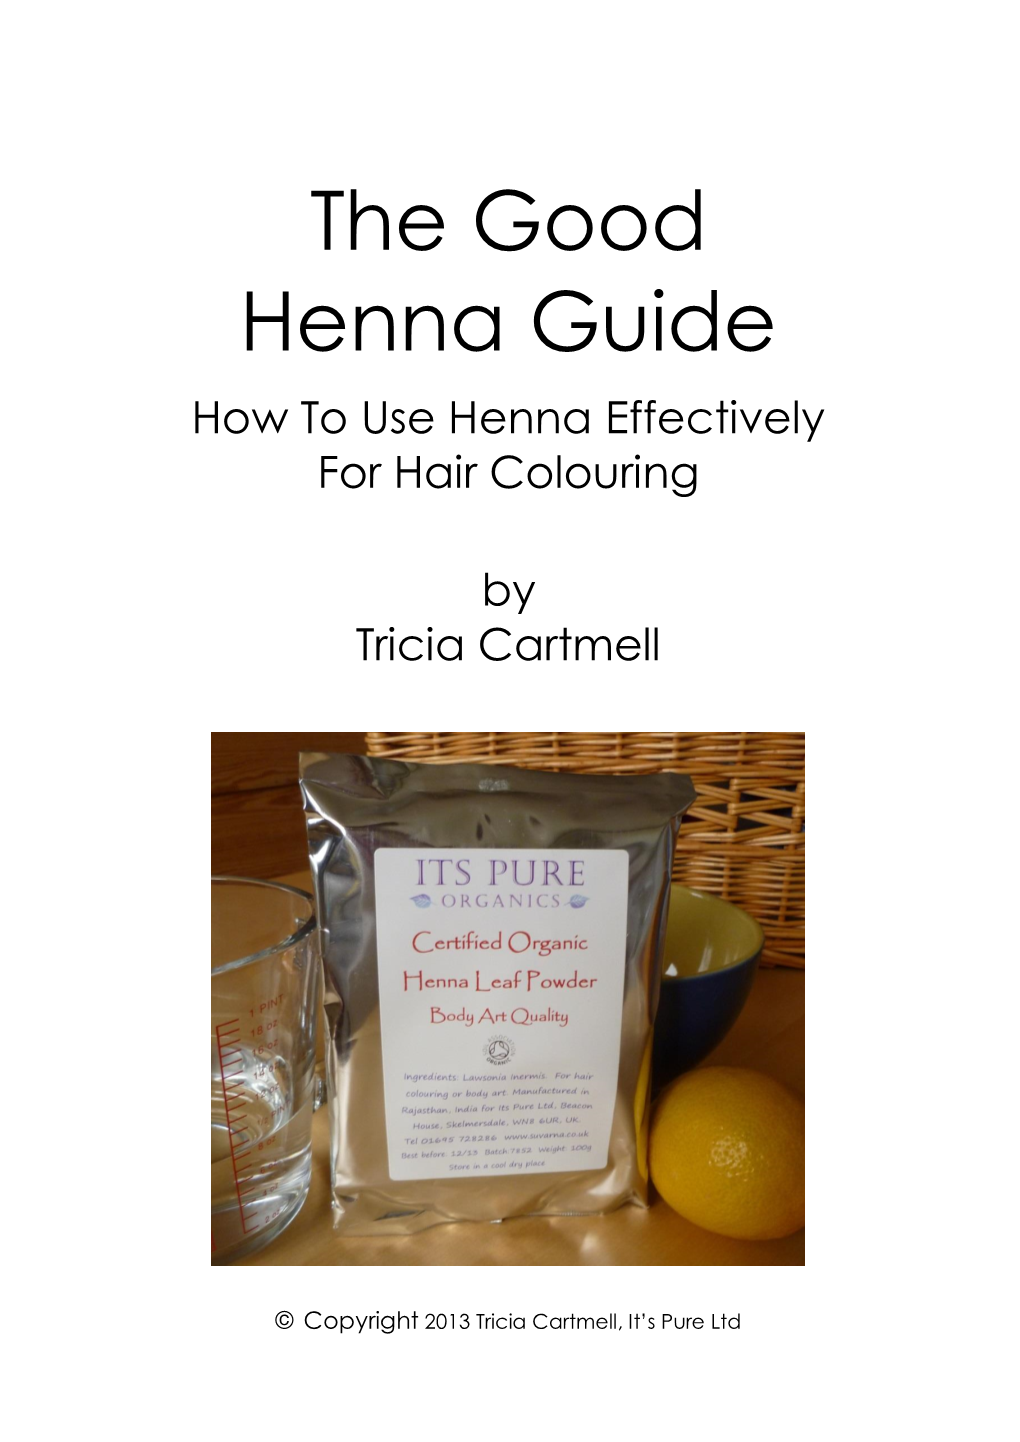 The Good Henna Guide \ How to Use Henna Effectively